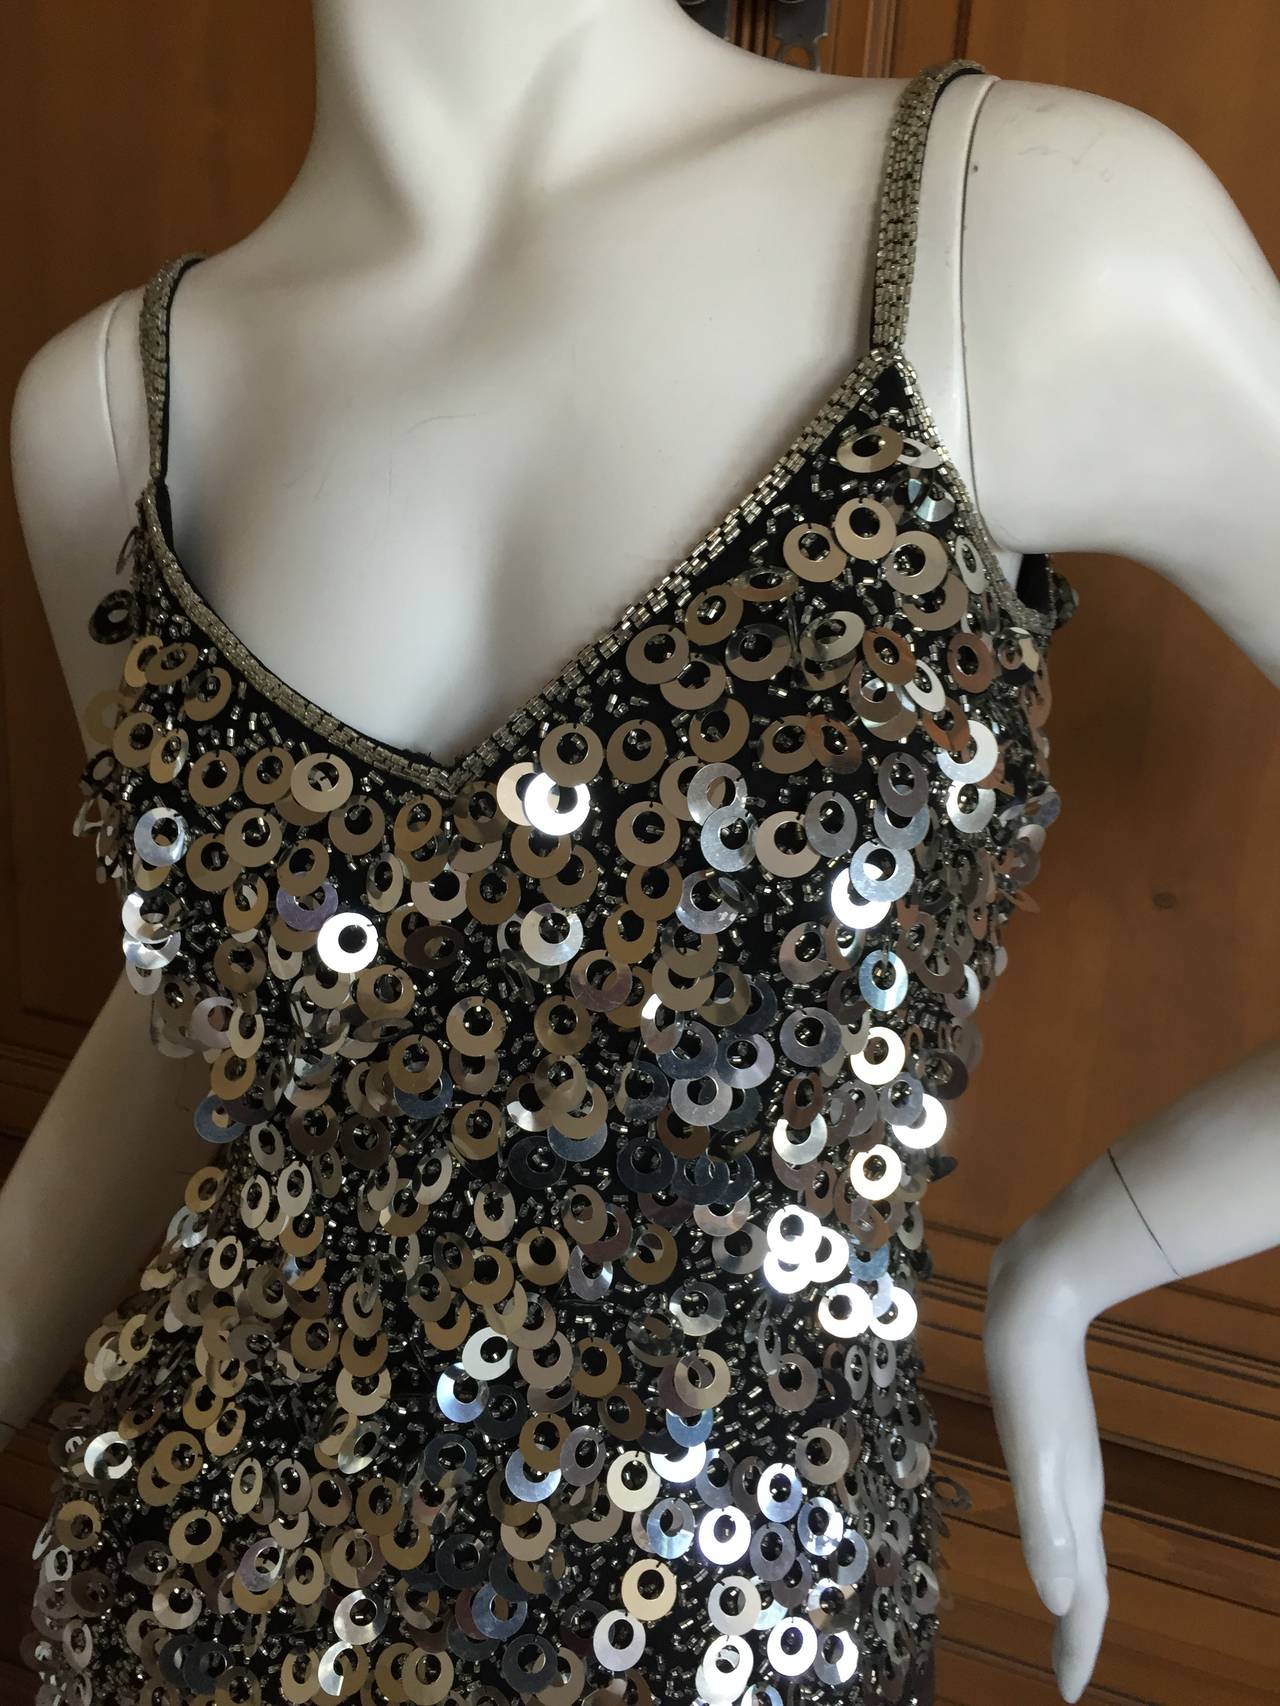 Oleg Cassini Rocking 1970's Disco Era Silver Dress 
This is one amazing dress. 
There is no size tag, it is appx sz 6

Silver beads and quarter size paillettes shimmer and shine with movement

BUST:	38 in. 
WAIST:	26 in. 
HIP:	40 in.